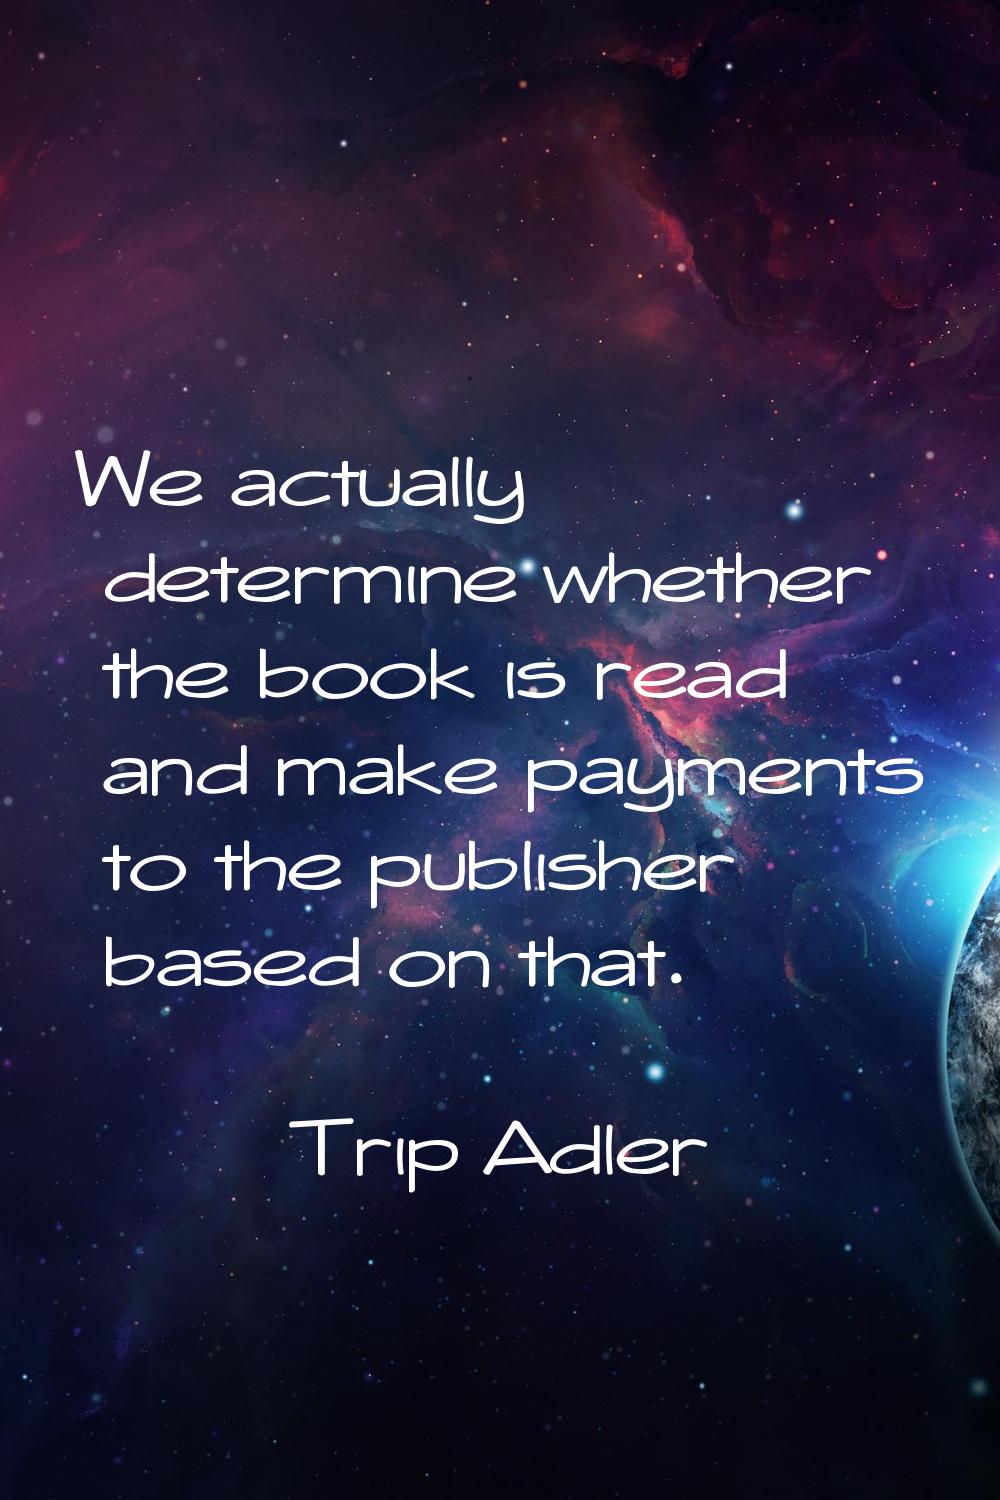 We actually determine whether the book is read and make payments to the publisher based on that.